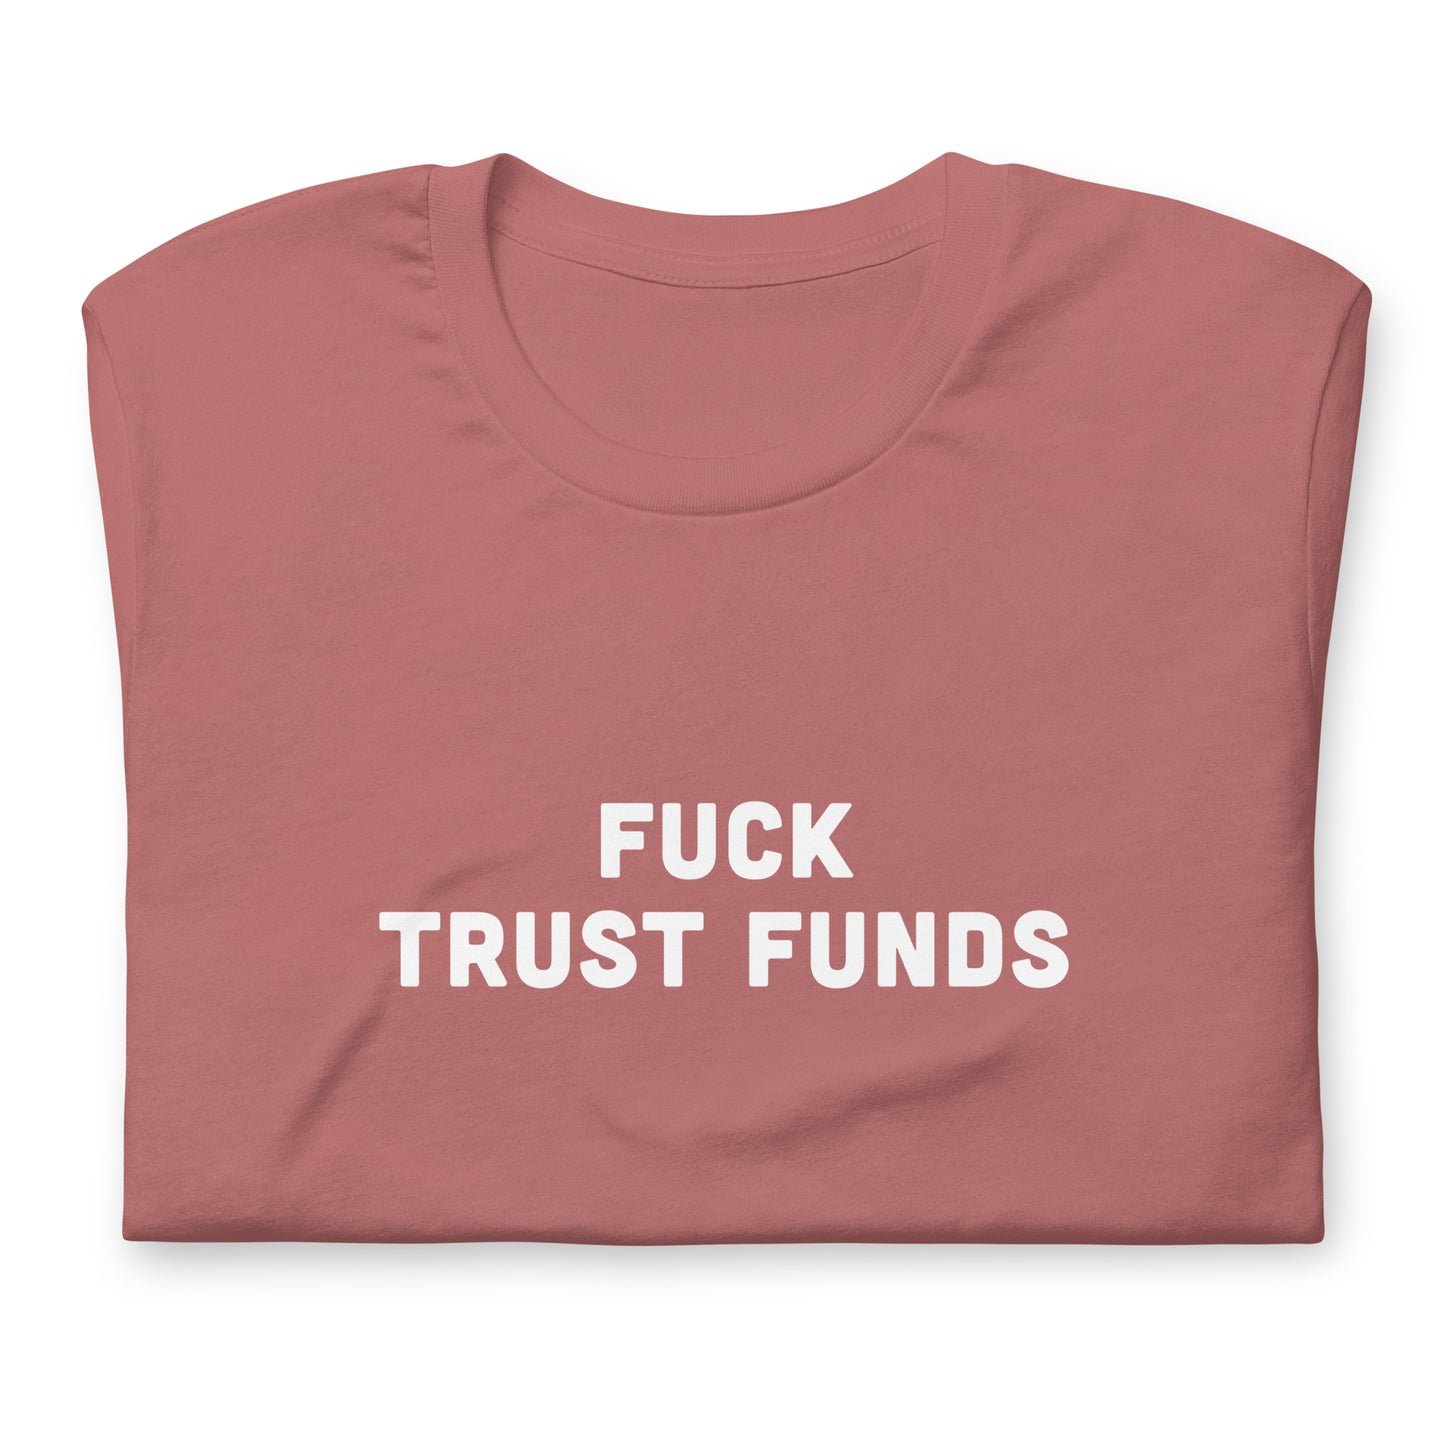 Fuck Trust Funds T-Shirt Size 2XL Color Navy